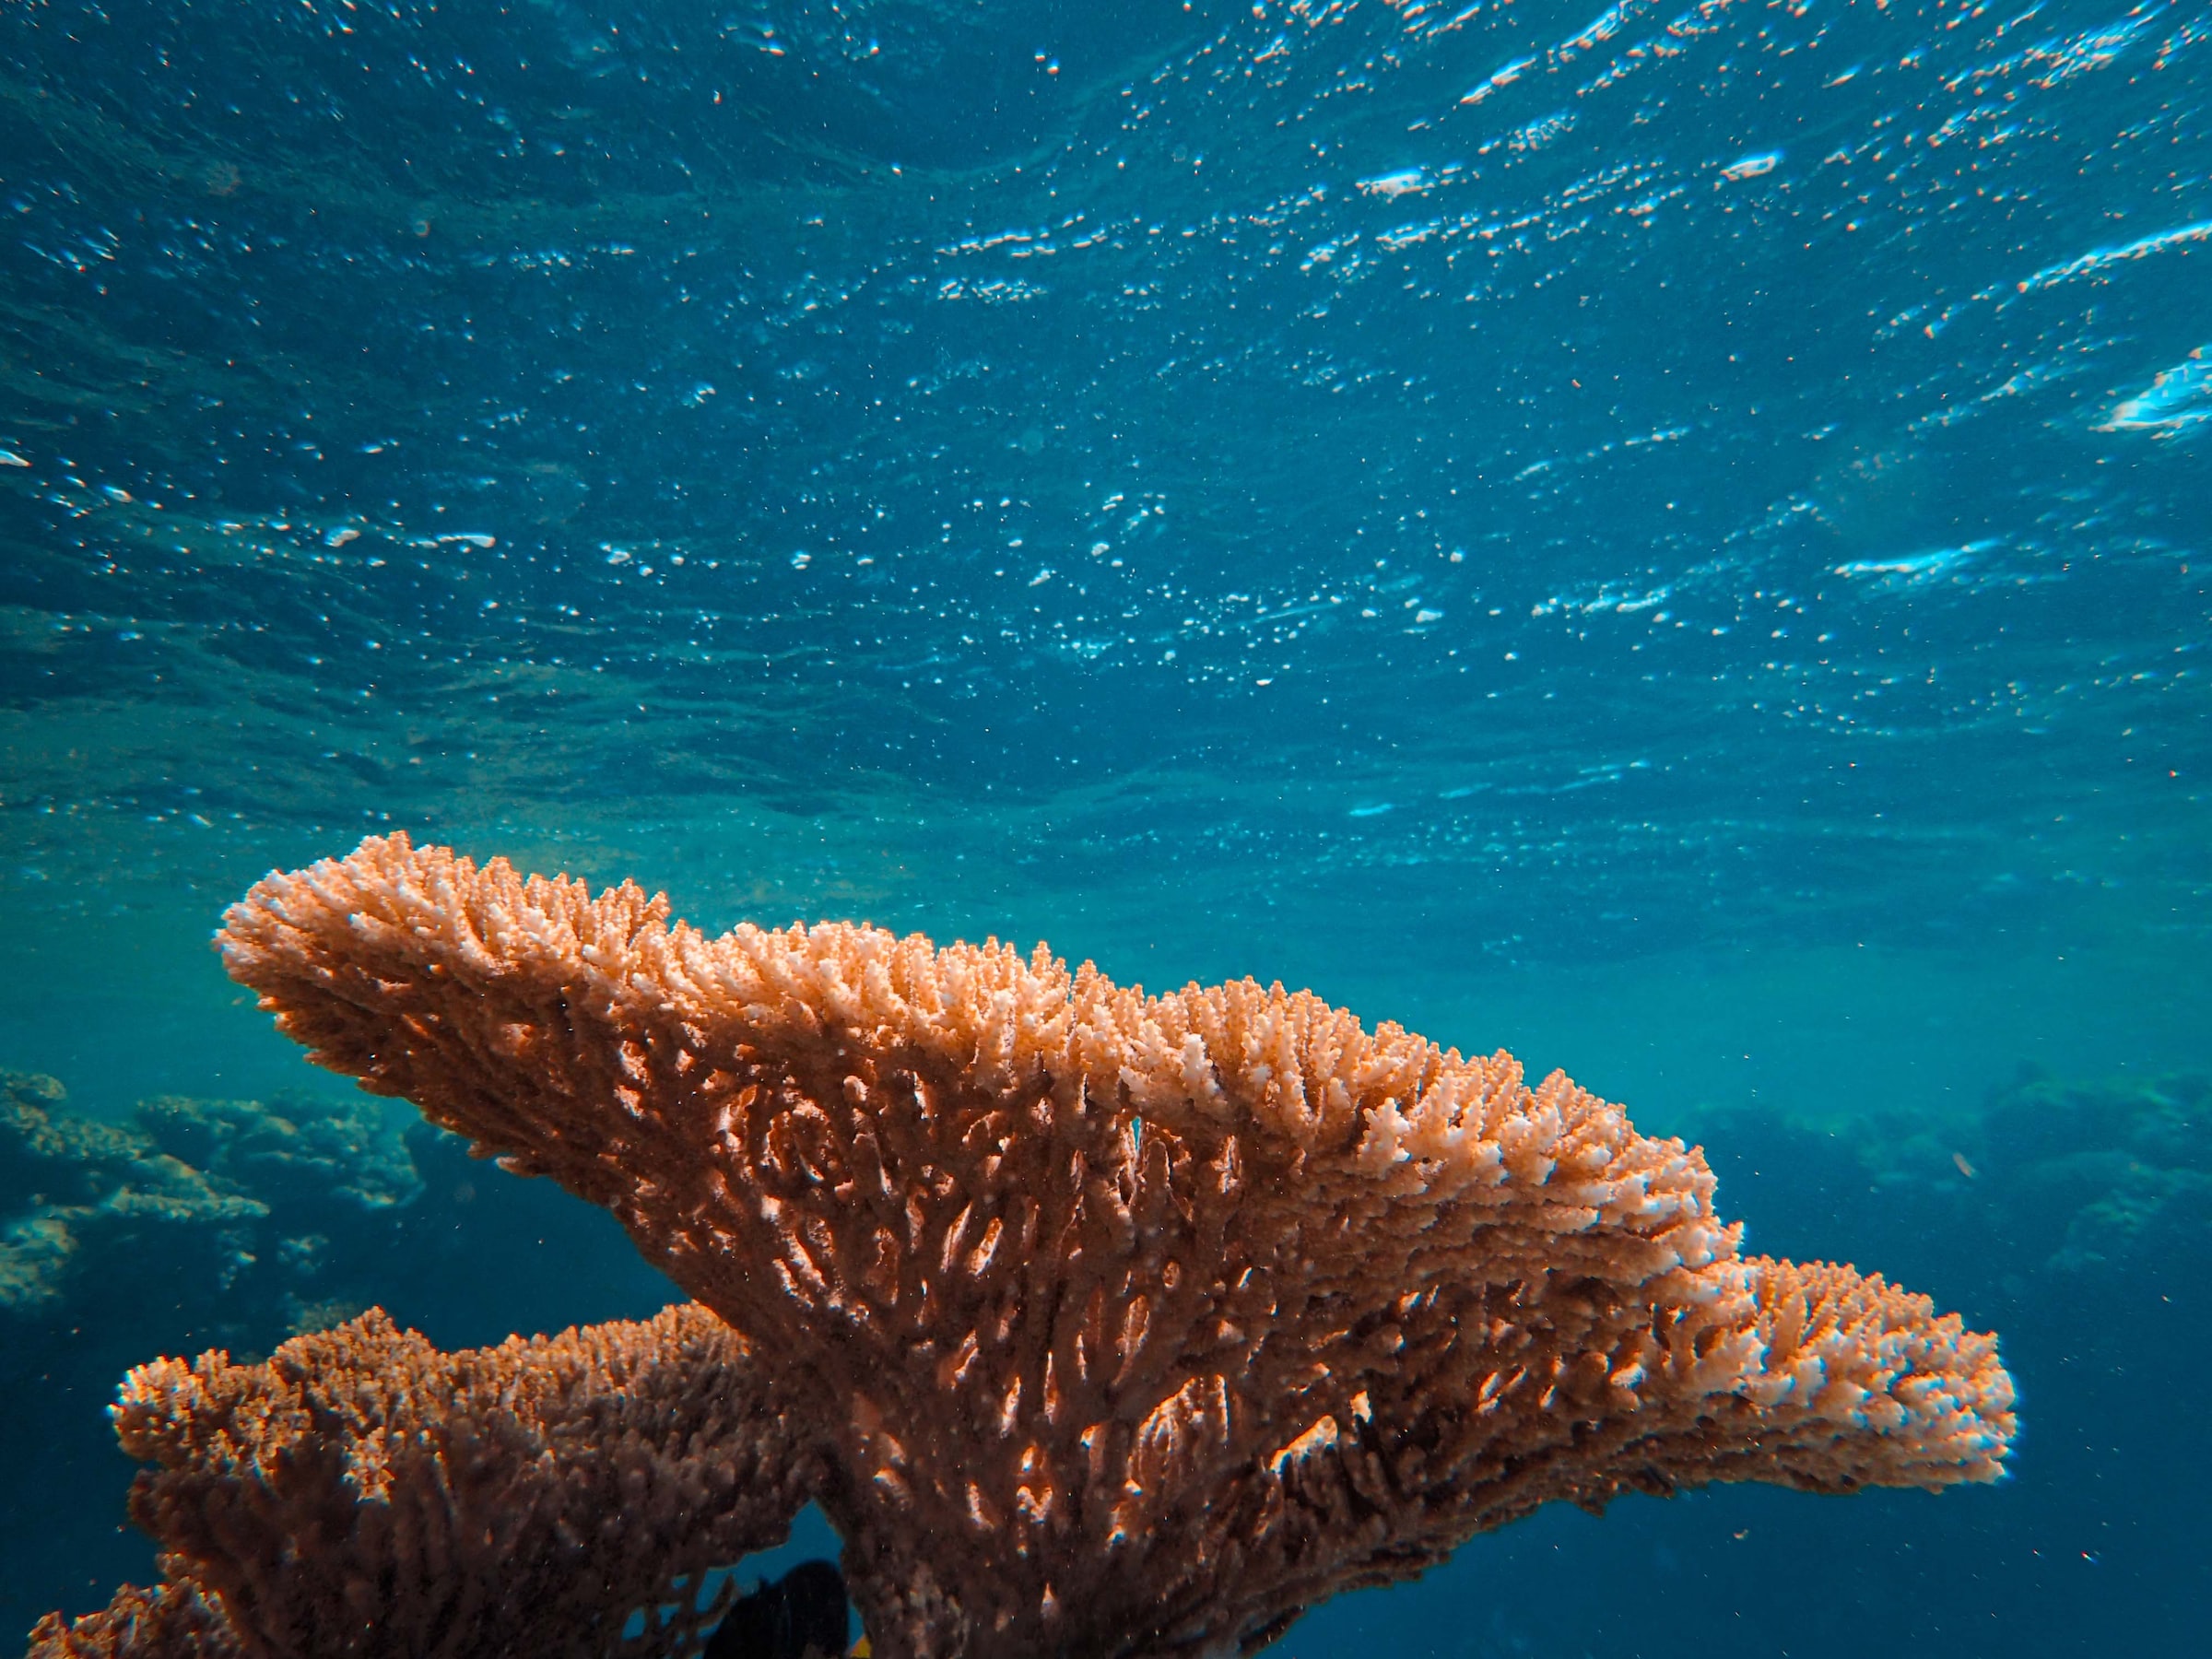 BP is planning to drill for gas on edge of world’s largest cold-water coral reef